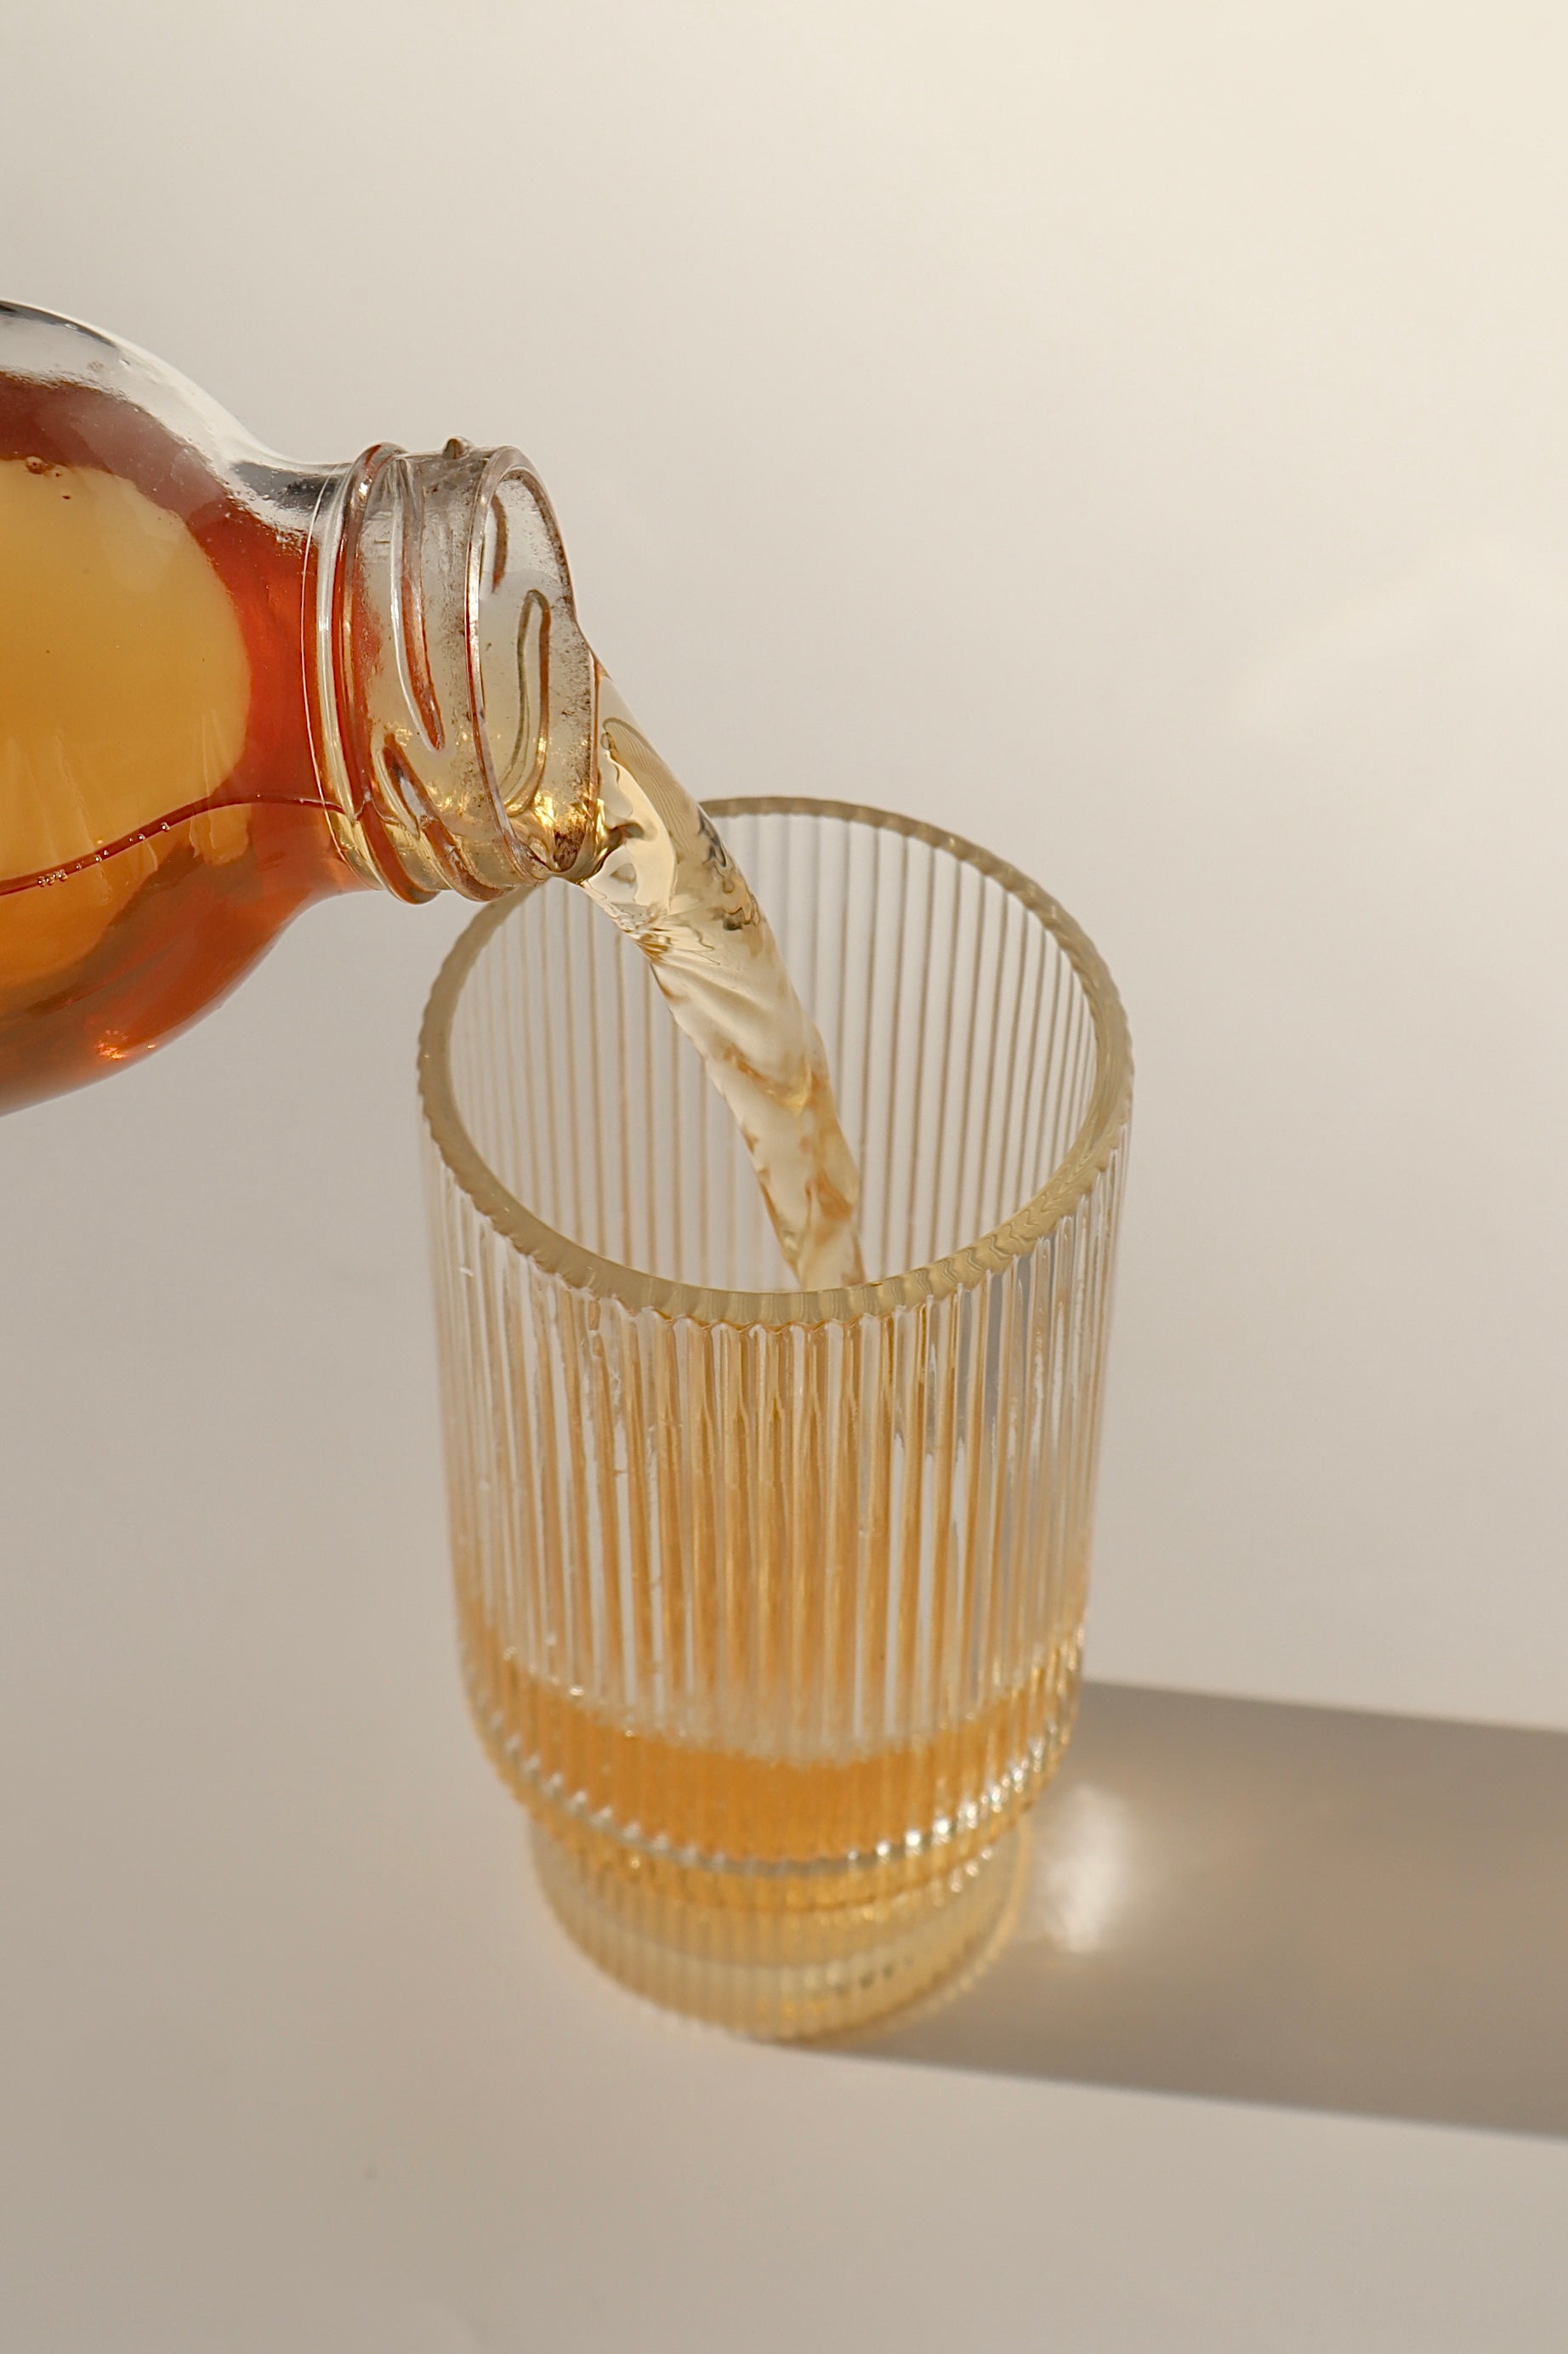 Photo of a delicious, fresh, raw and totally natural glass of kombucha being poured into a fancy glass, against an aesthetic background with nice shadows being cast - boochacha